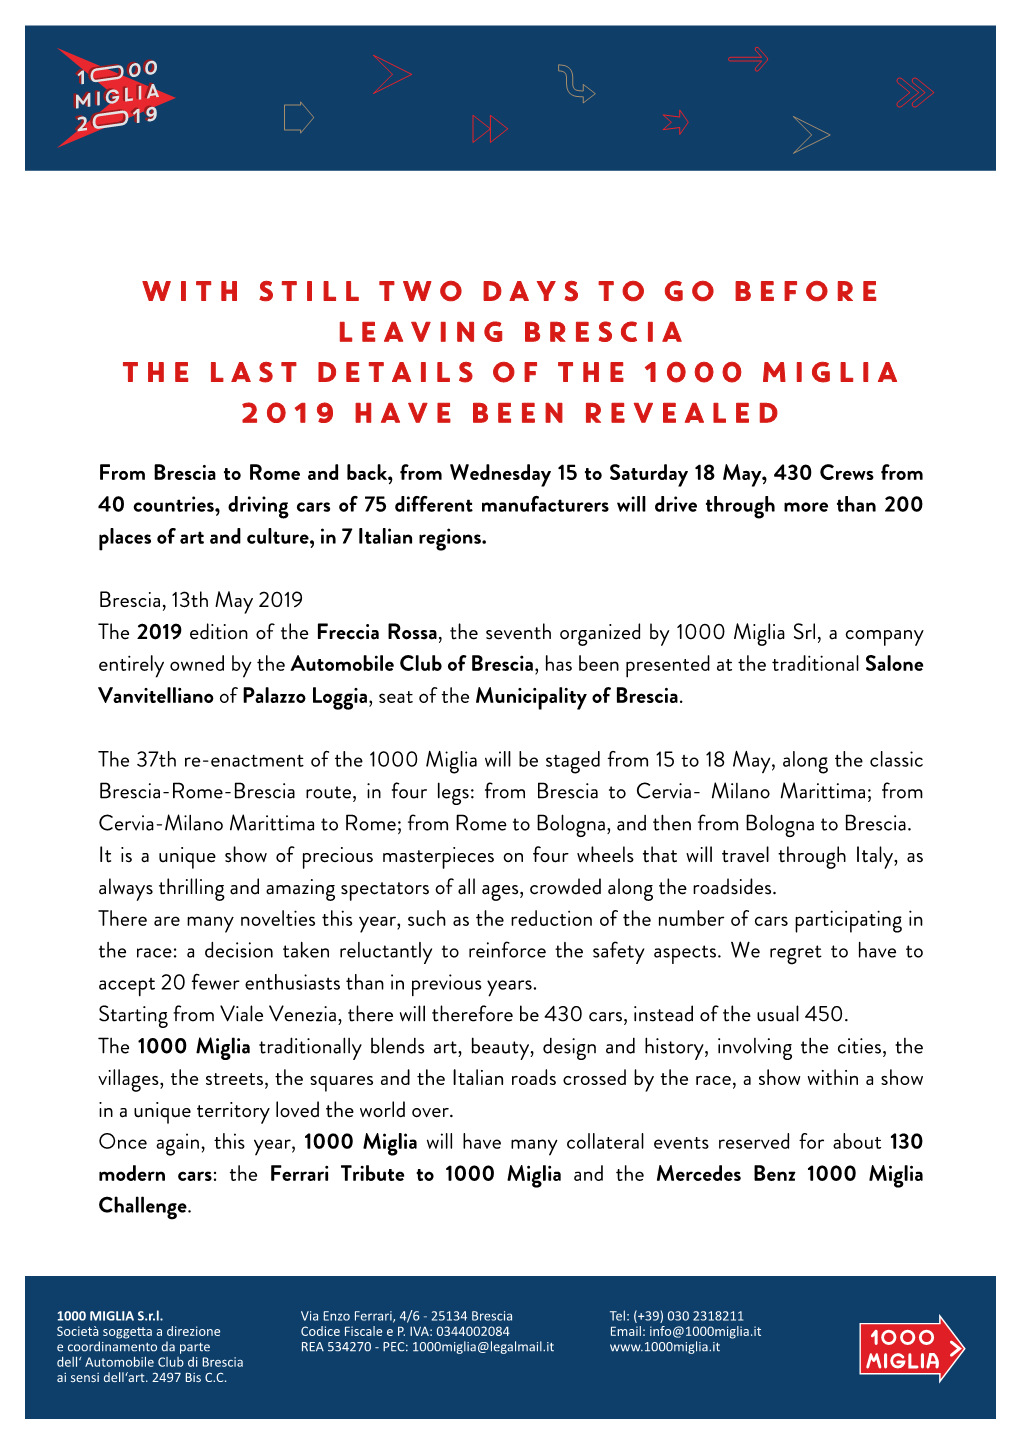 With Still Two Days to Go Before Leaving Brescia the Last Details of the 1000 Miglia 2019 Have Been Revealed